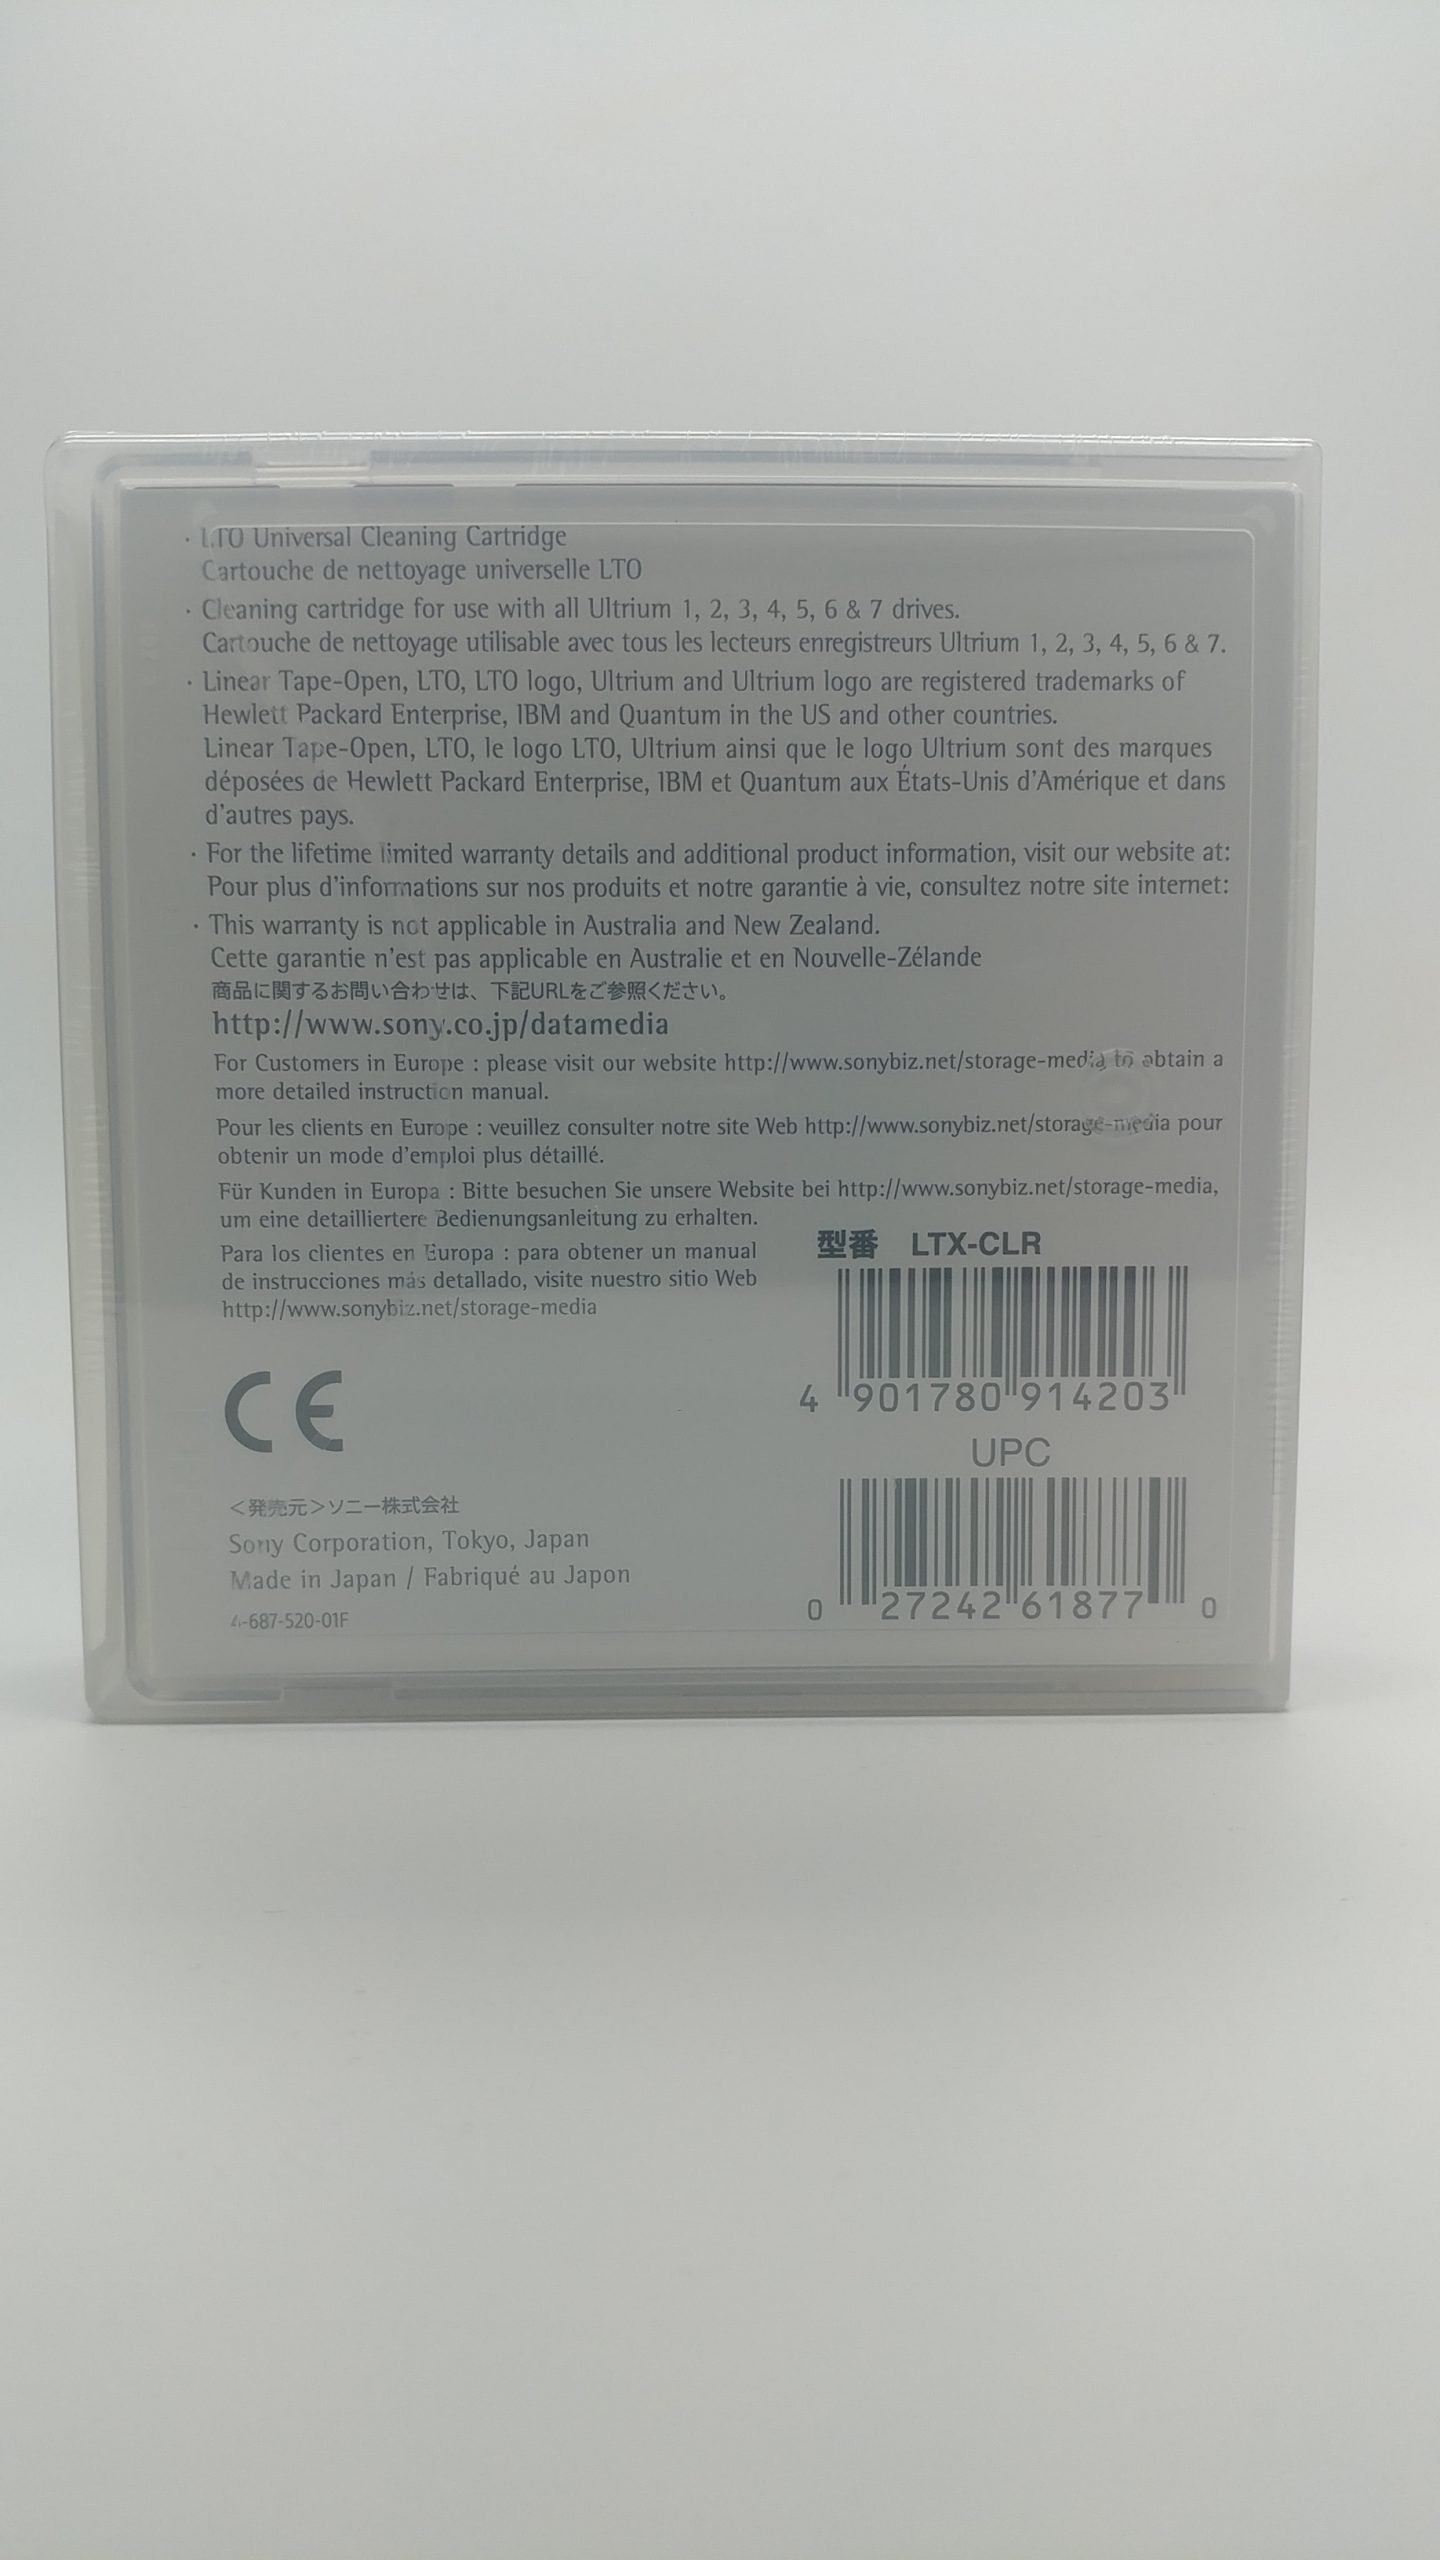 Sony LTO Universal Cleaning Cartridge - Amars Limited